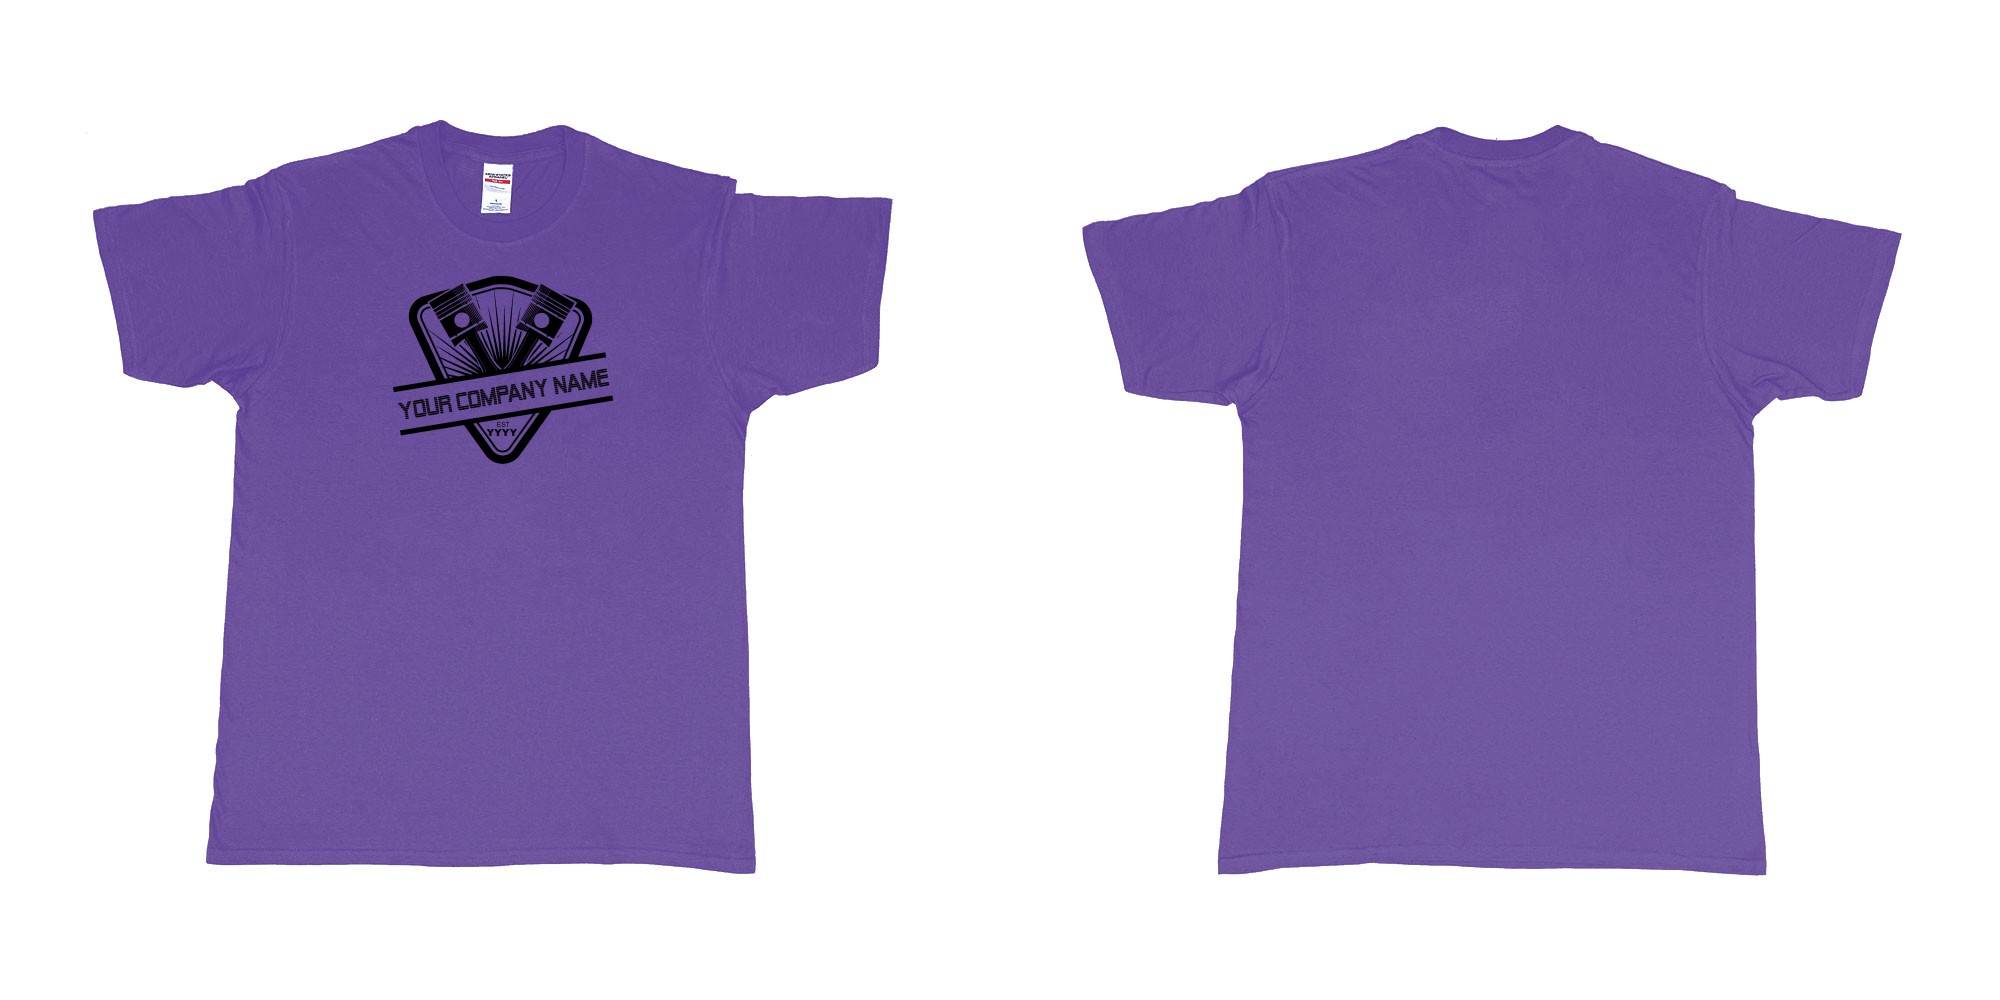 Custom tshirt design two piston custom personalized car repairs or mechanic own text print tshirt design in fabric color purple choice your own text made in Bali by The Pirate Way